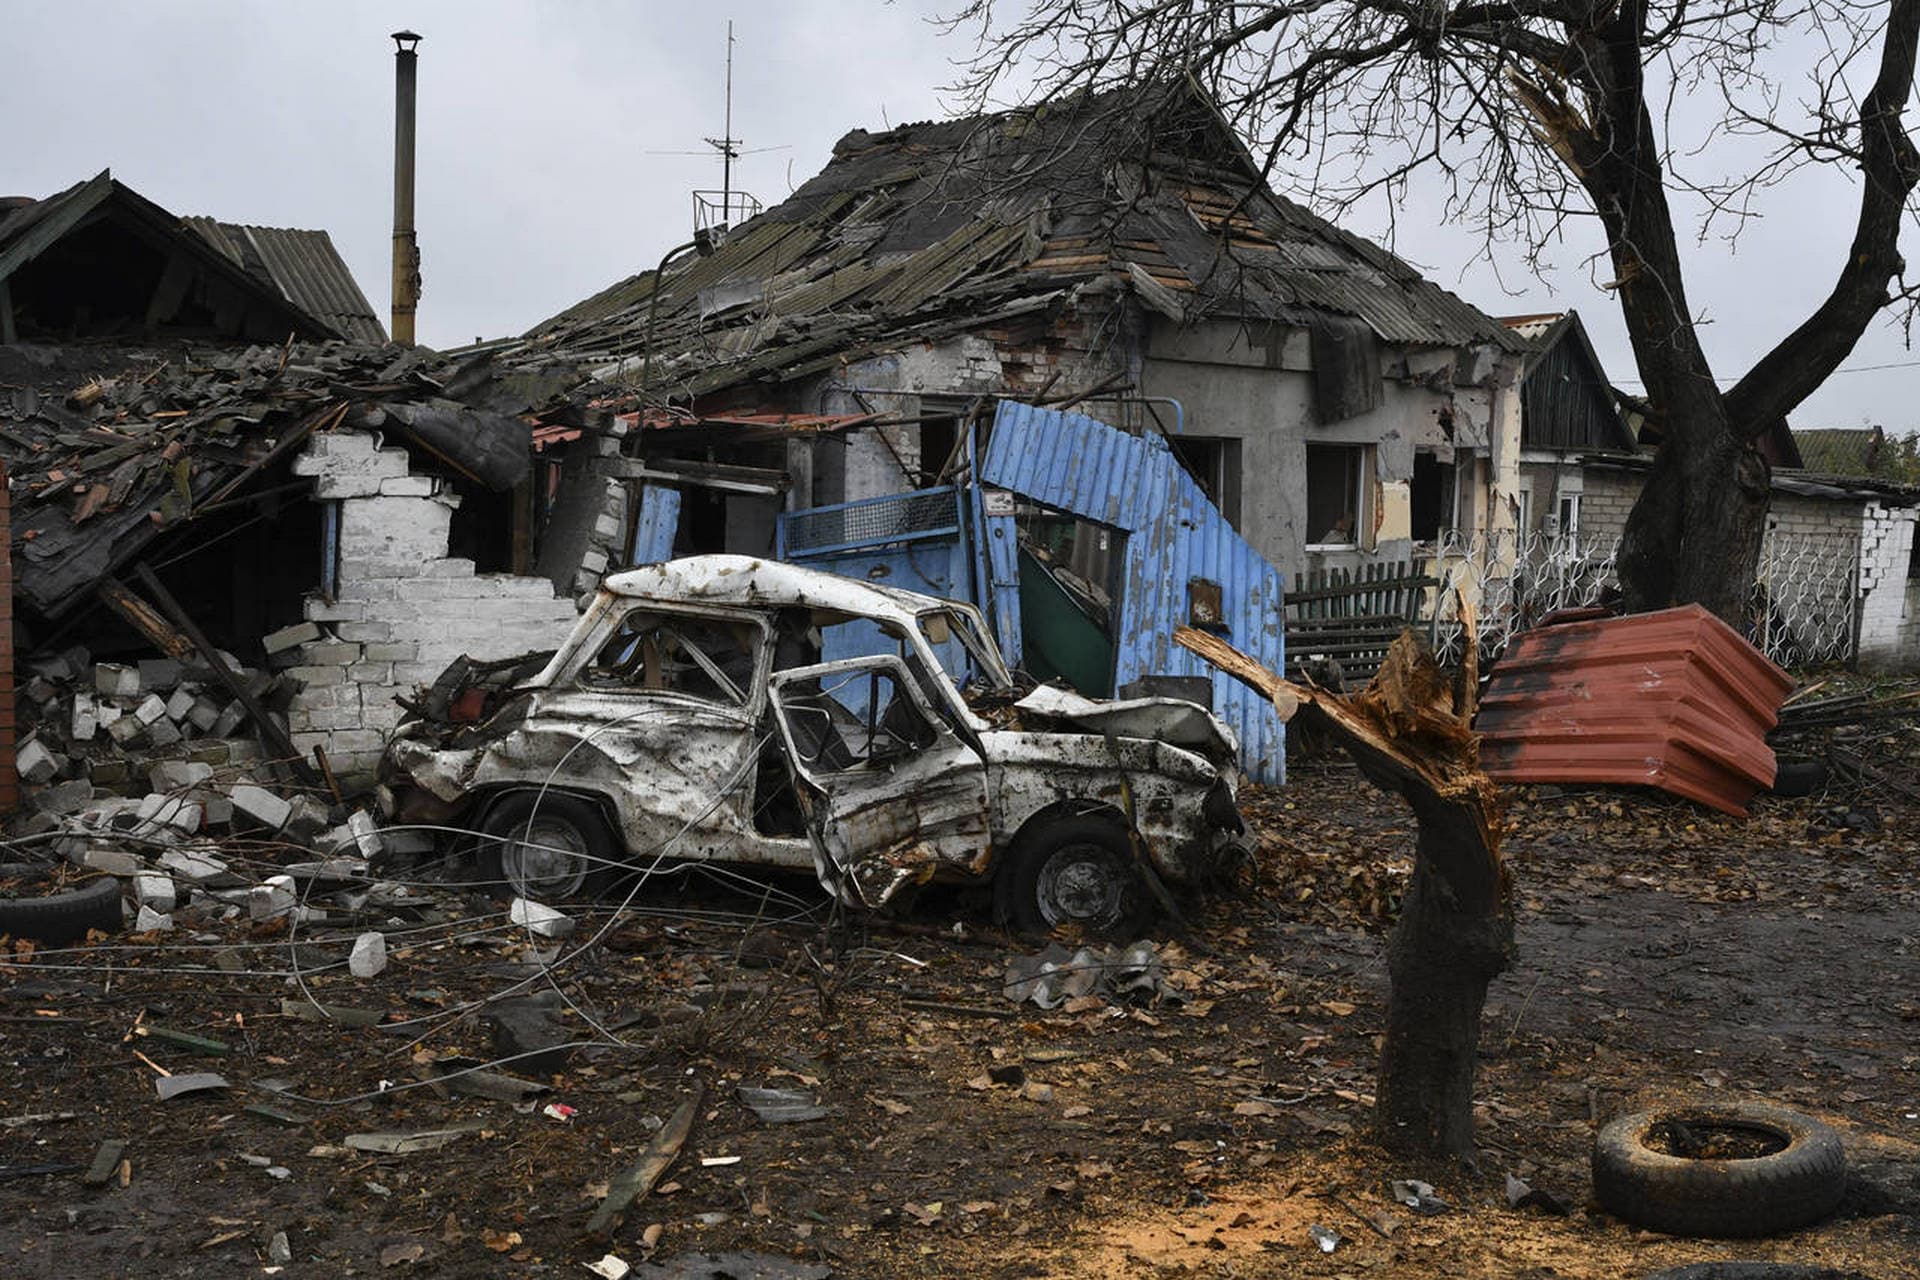 A damaged Soviet-era Ukrainian car Zaporozhets is seen next to a destroyed apartment building after Russian shelling in Pokrovsk